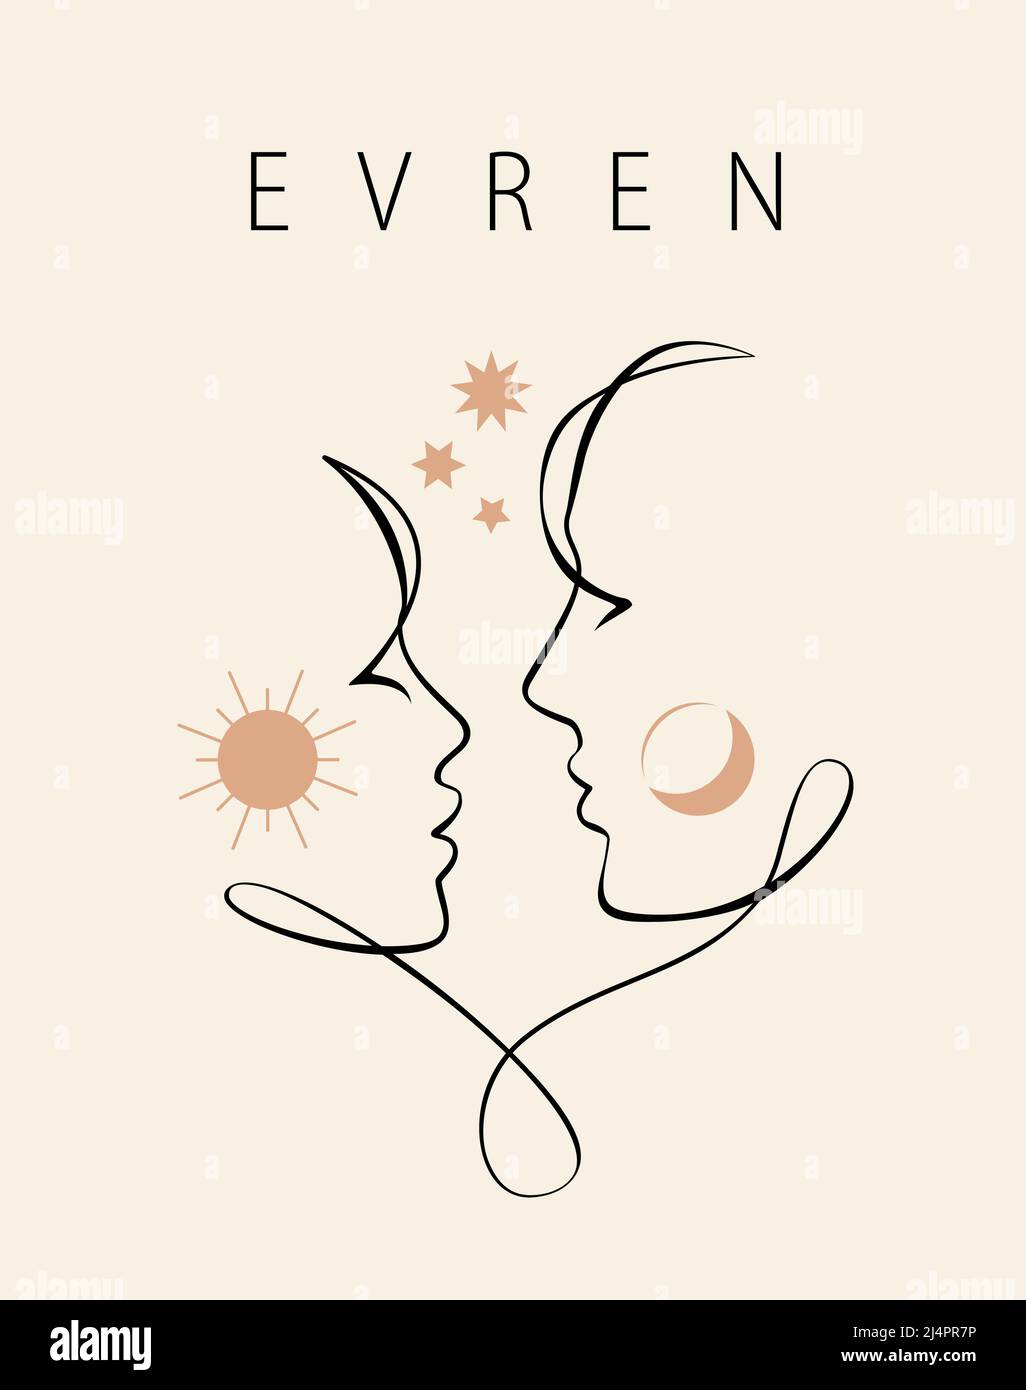 Love, continuous one line drawing. Couple kissing cover poster design. Vector illustration minimalism concept Stock Vector